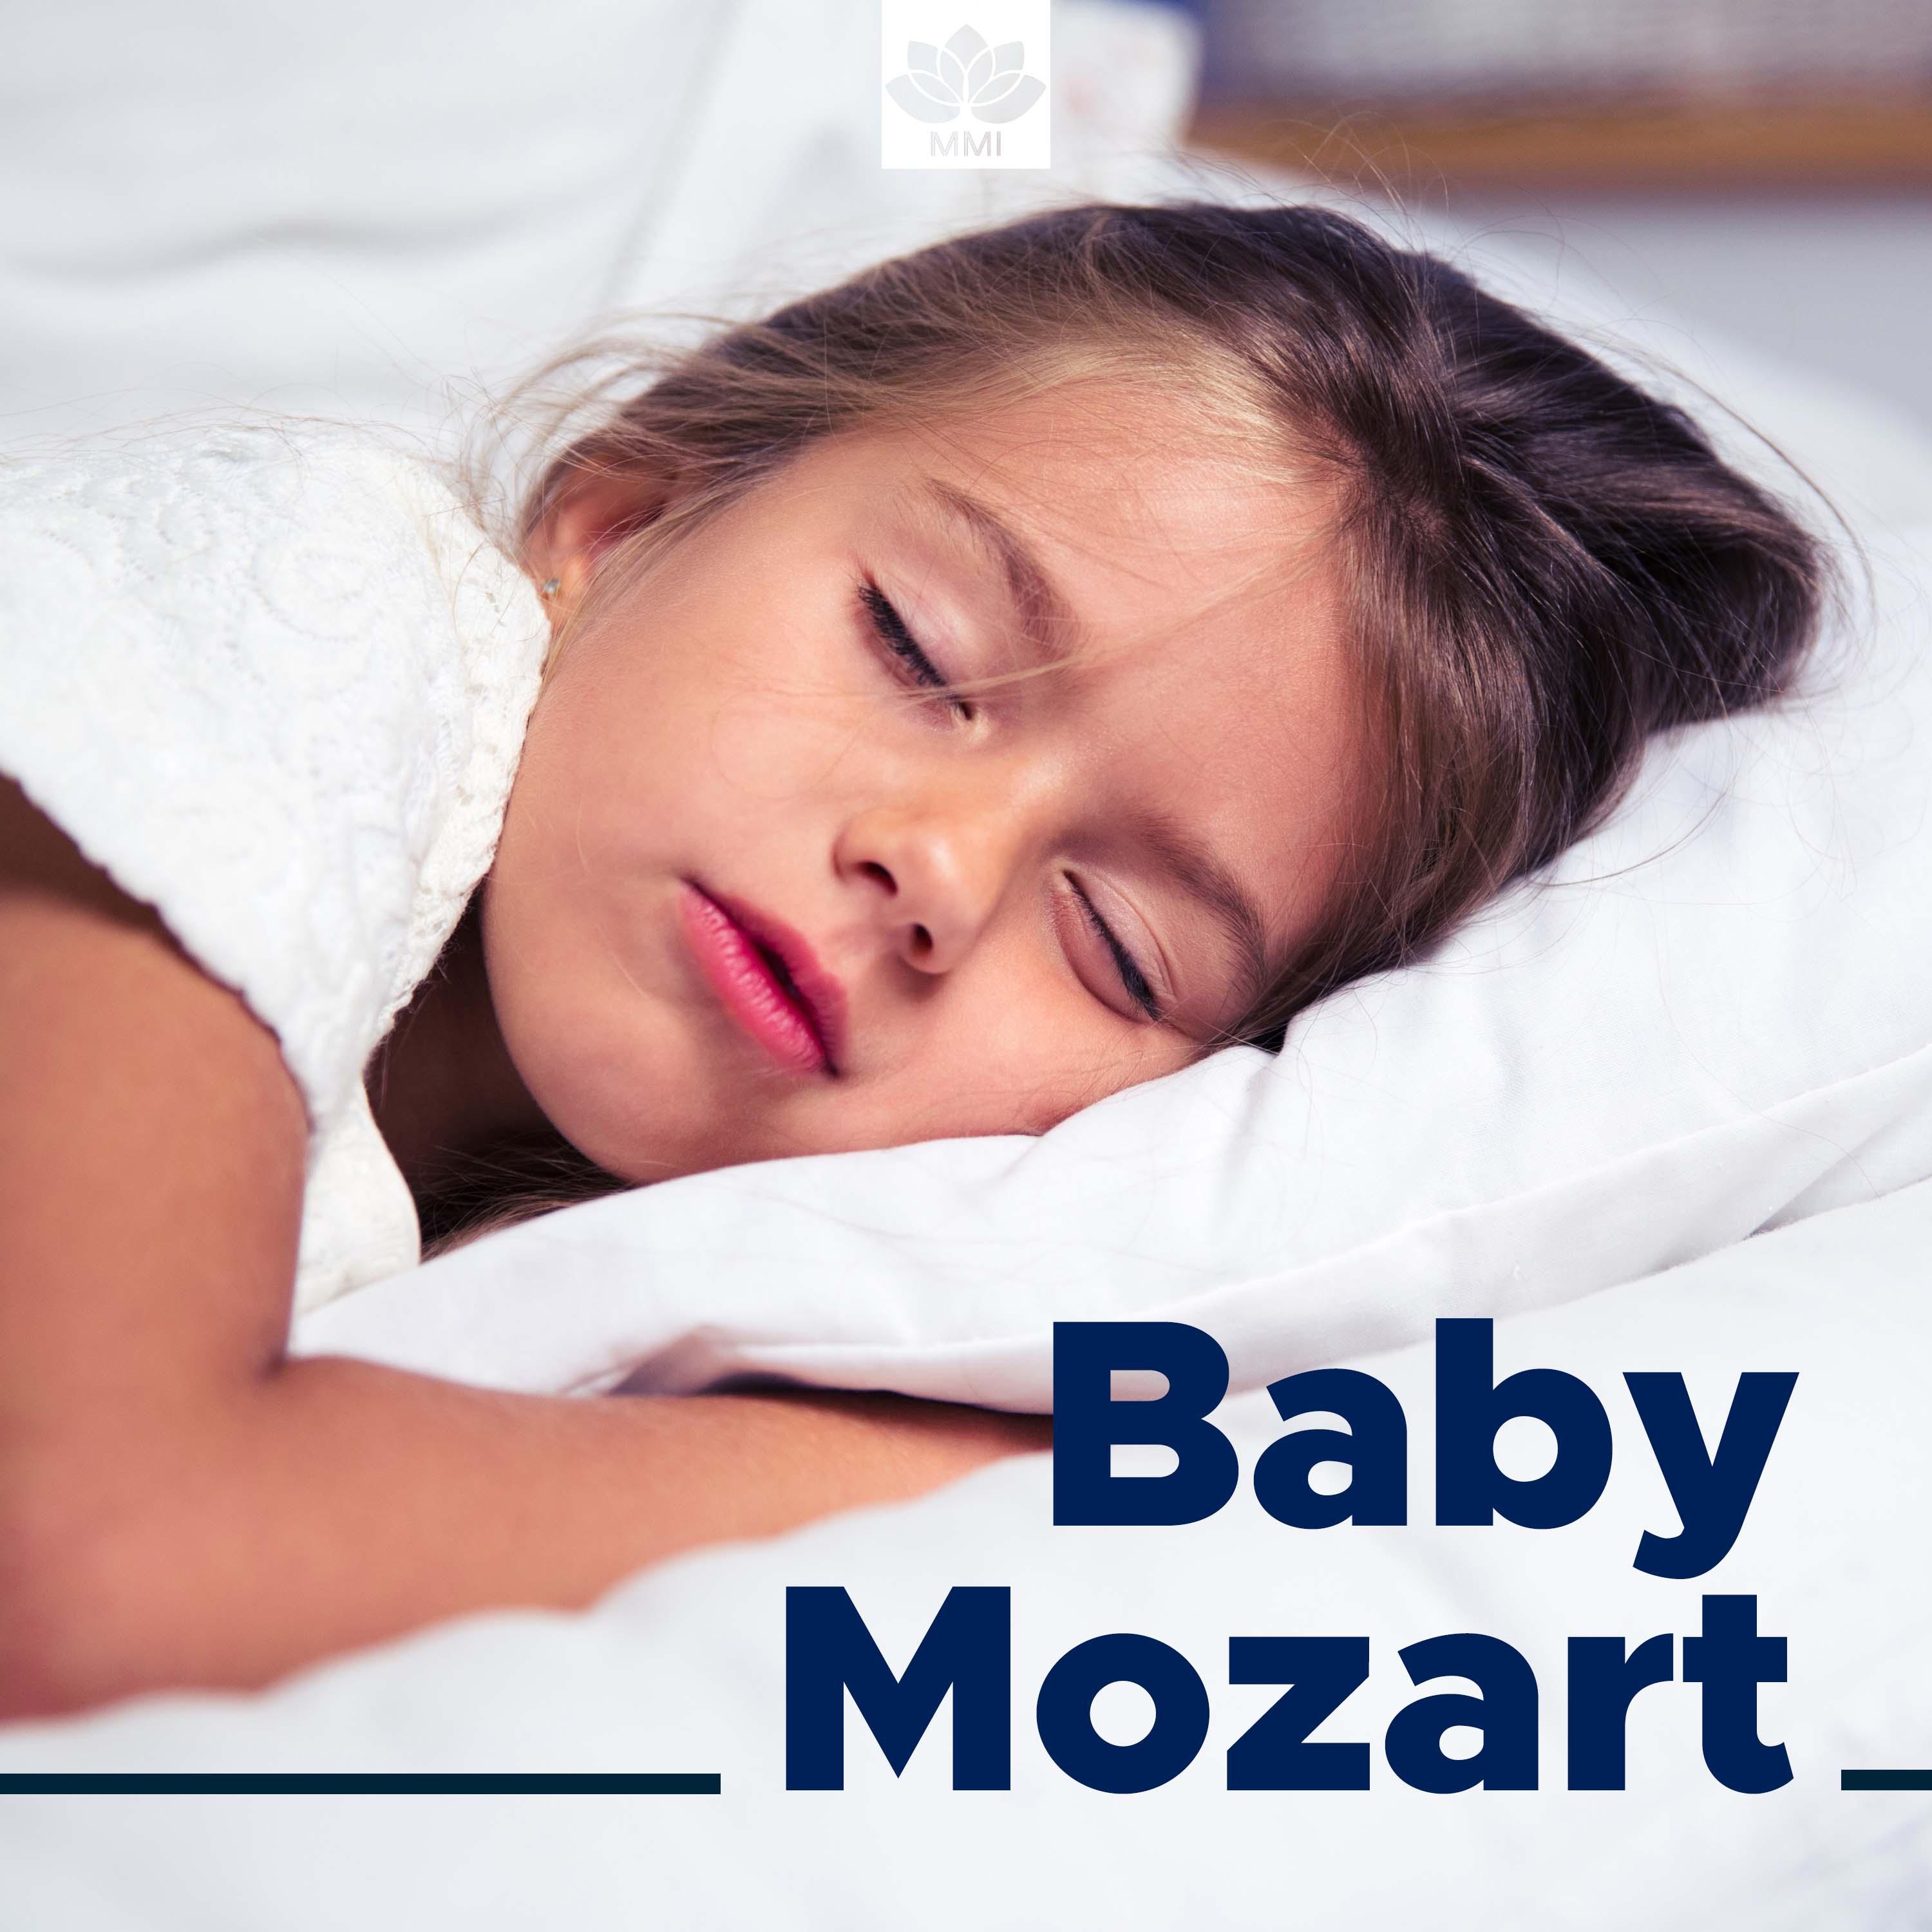 Baby Mozart - Lullabies for Bedtime for Babies, Mothers, Toddlers and Newborns